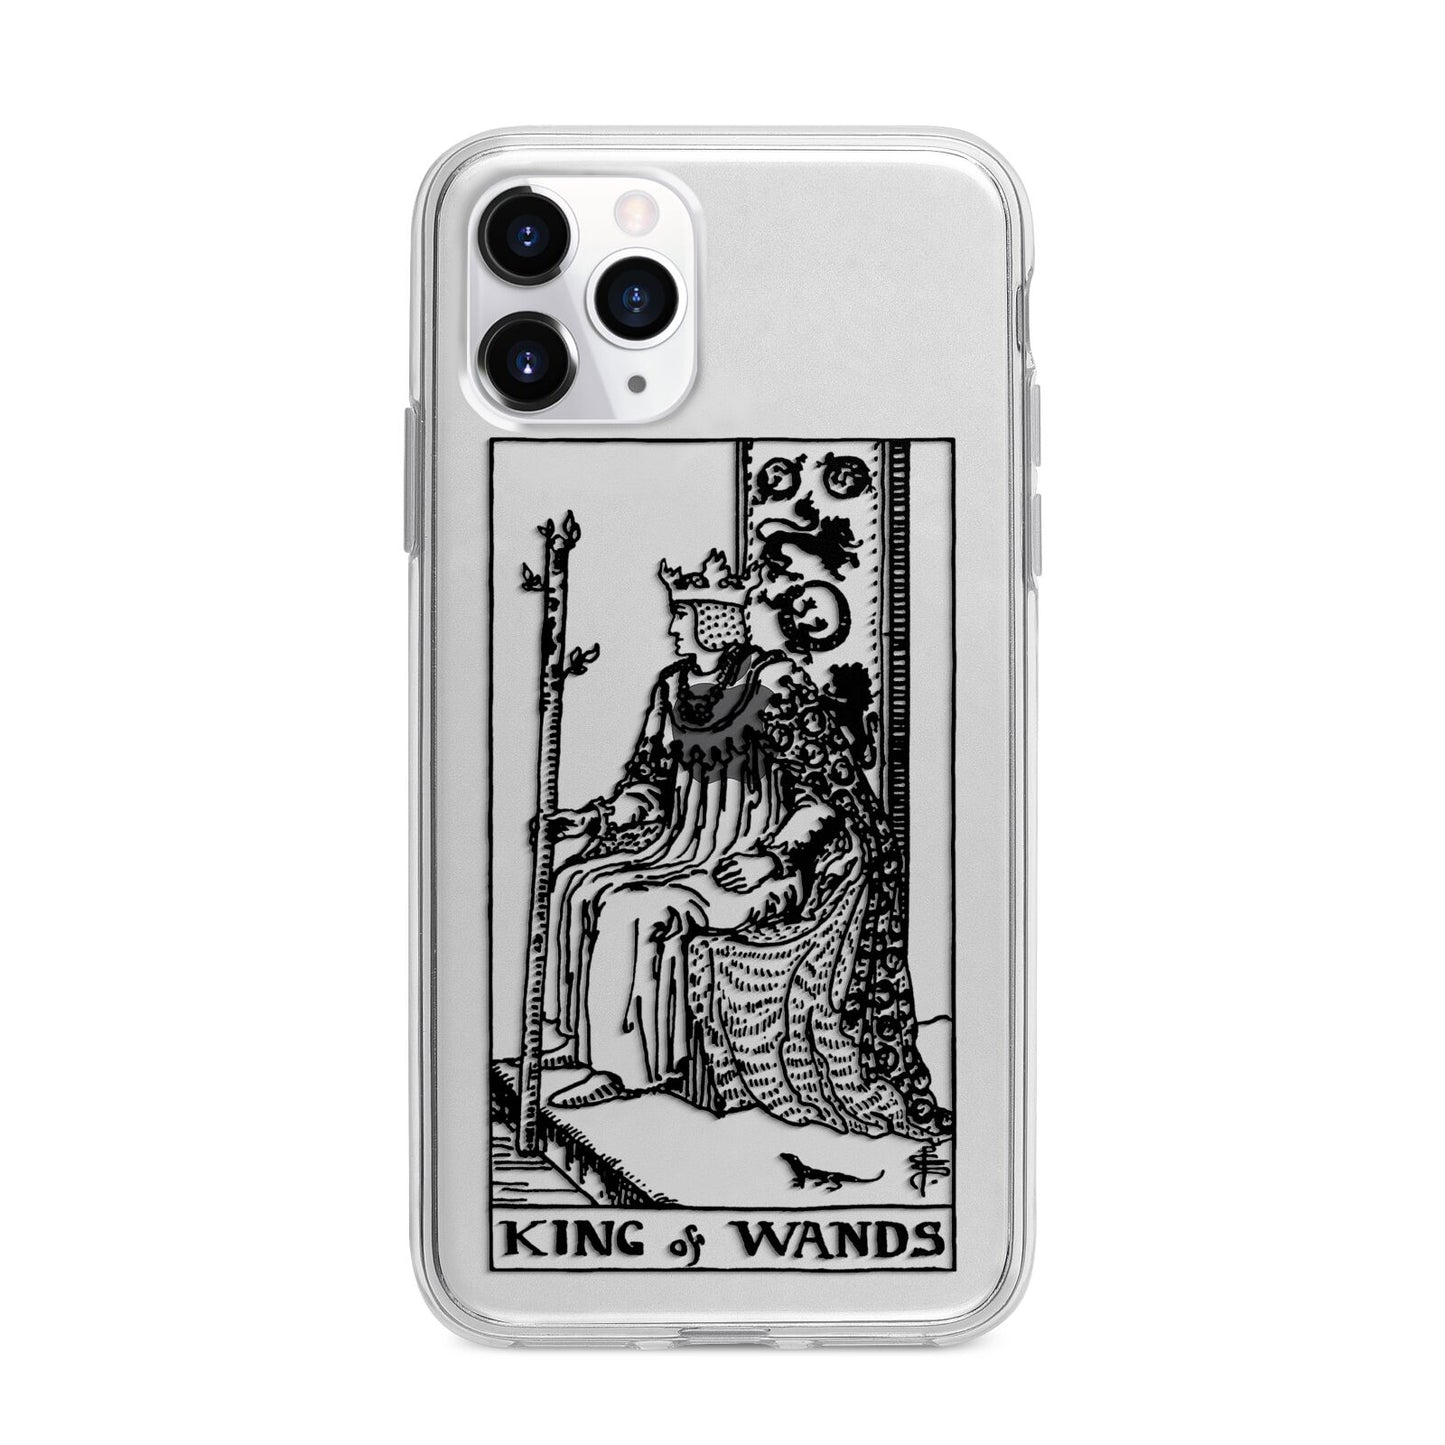 King of Wands Monochrome Apple iPhone 11 Pro Max in Silver with Bumper Case